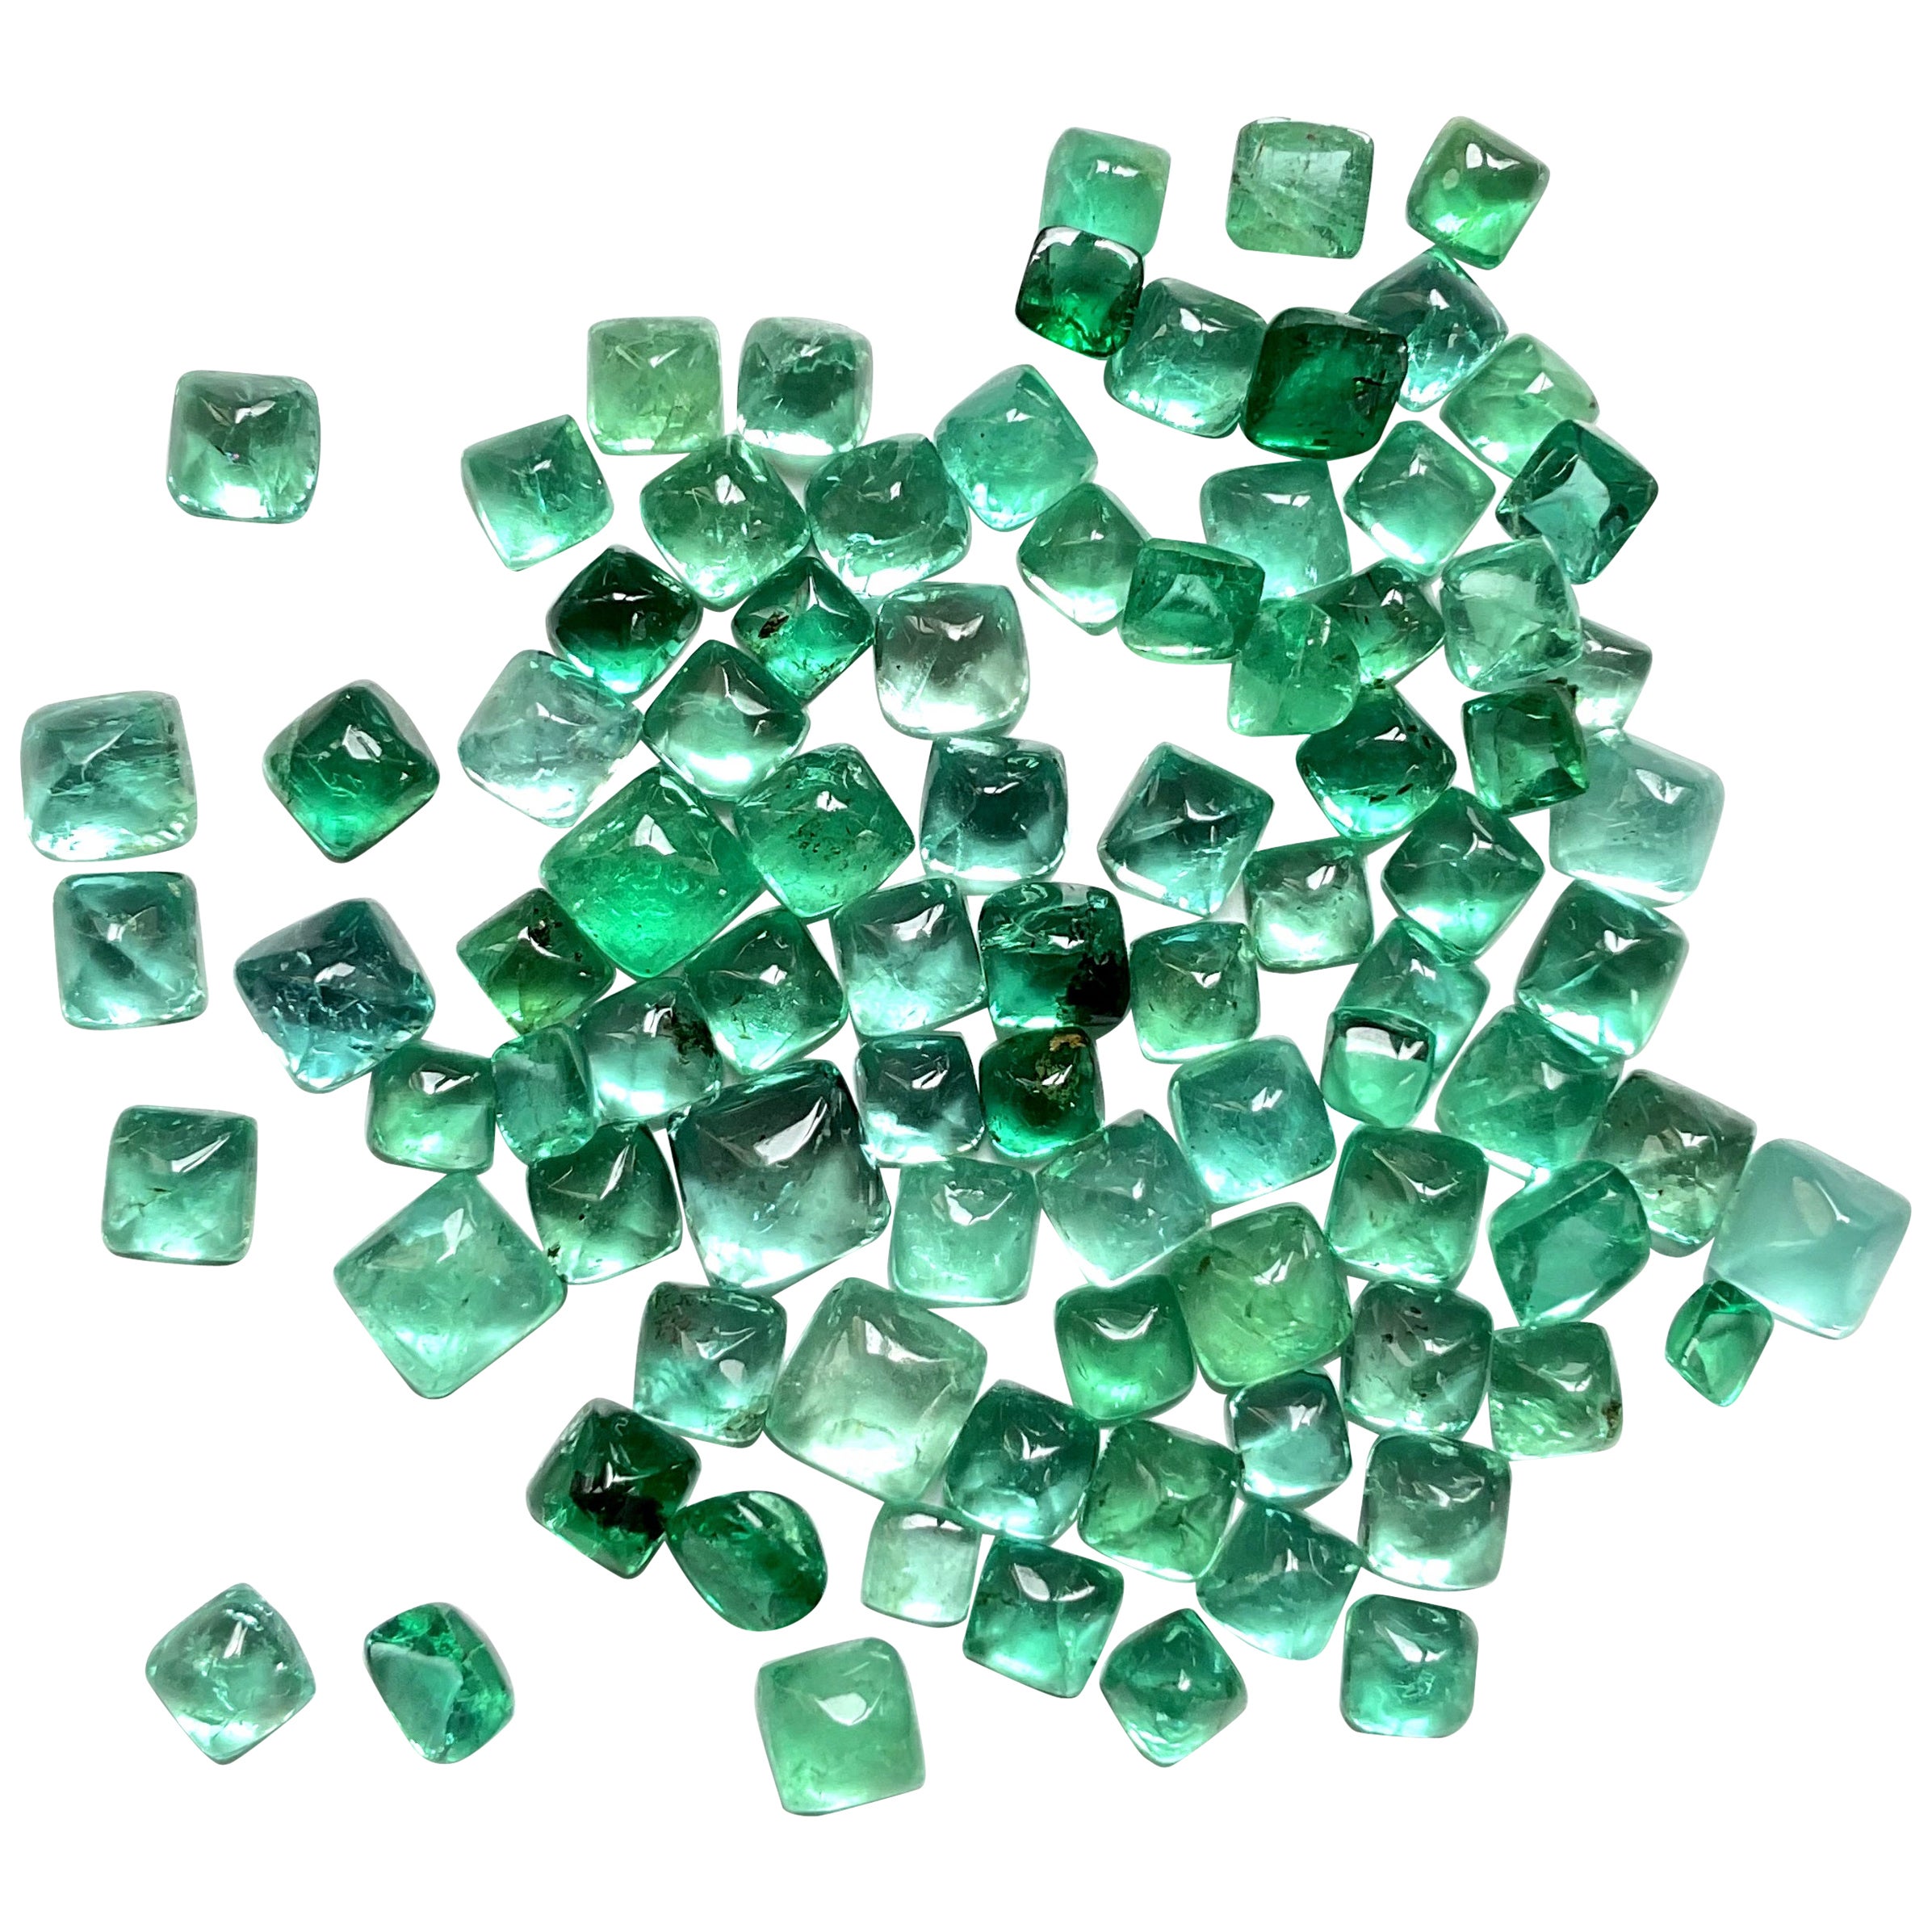 27.19 Carats Zambian Emerald Sugarloaf Cabochon For Fine Jewelry Natural Gem For Sale